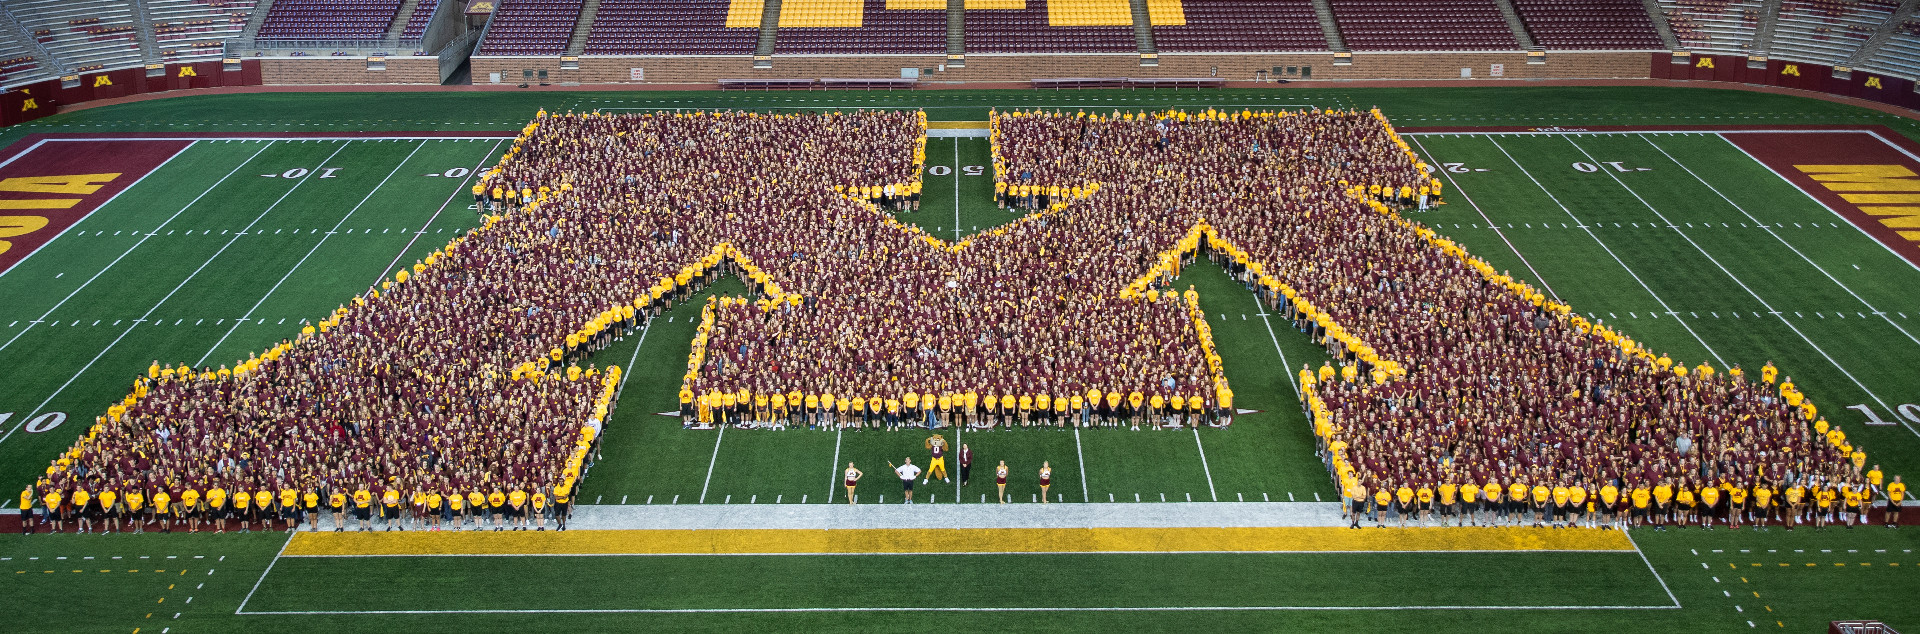 2019 University of Minensota Freshmen create a Block M on the football field with the marching band and welcome week leaders